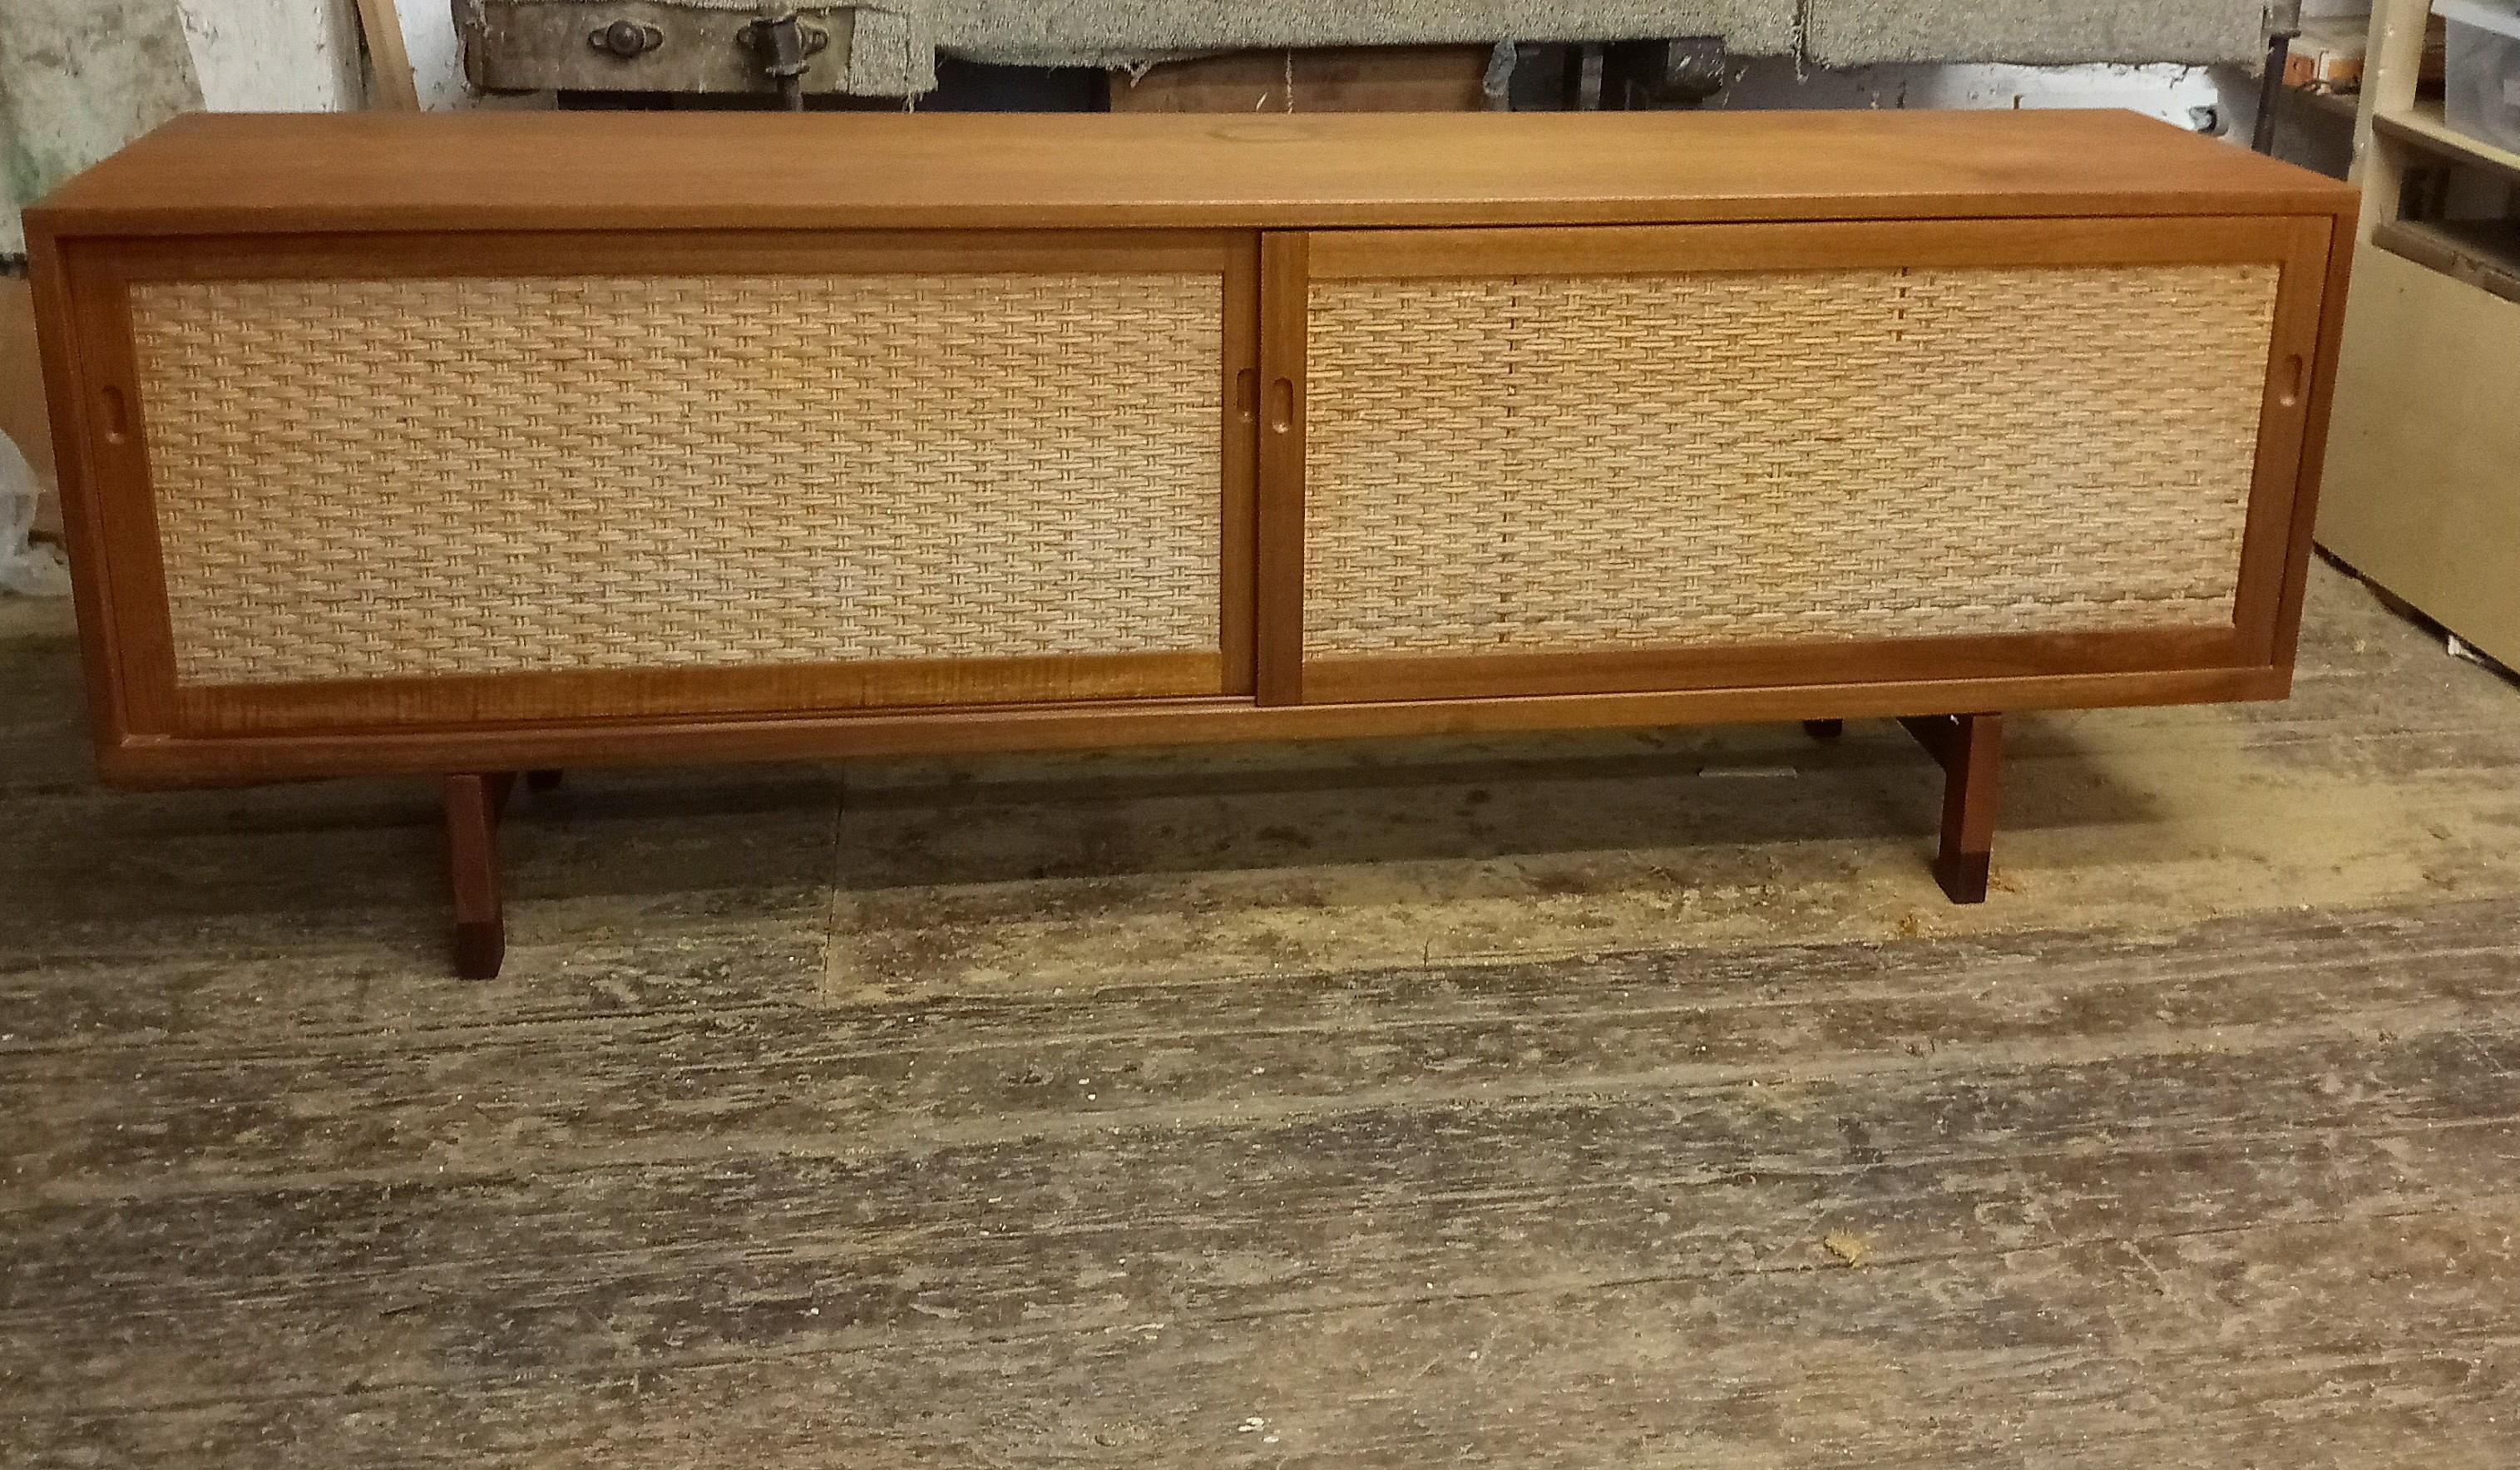 Modell RY 26 Sideboard in Teak by Hans Wegner for Ry Møbler, 1950s
in used condition. 
The sideboard has some signs of use and age.
One big spot on the top